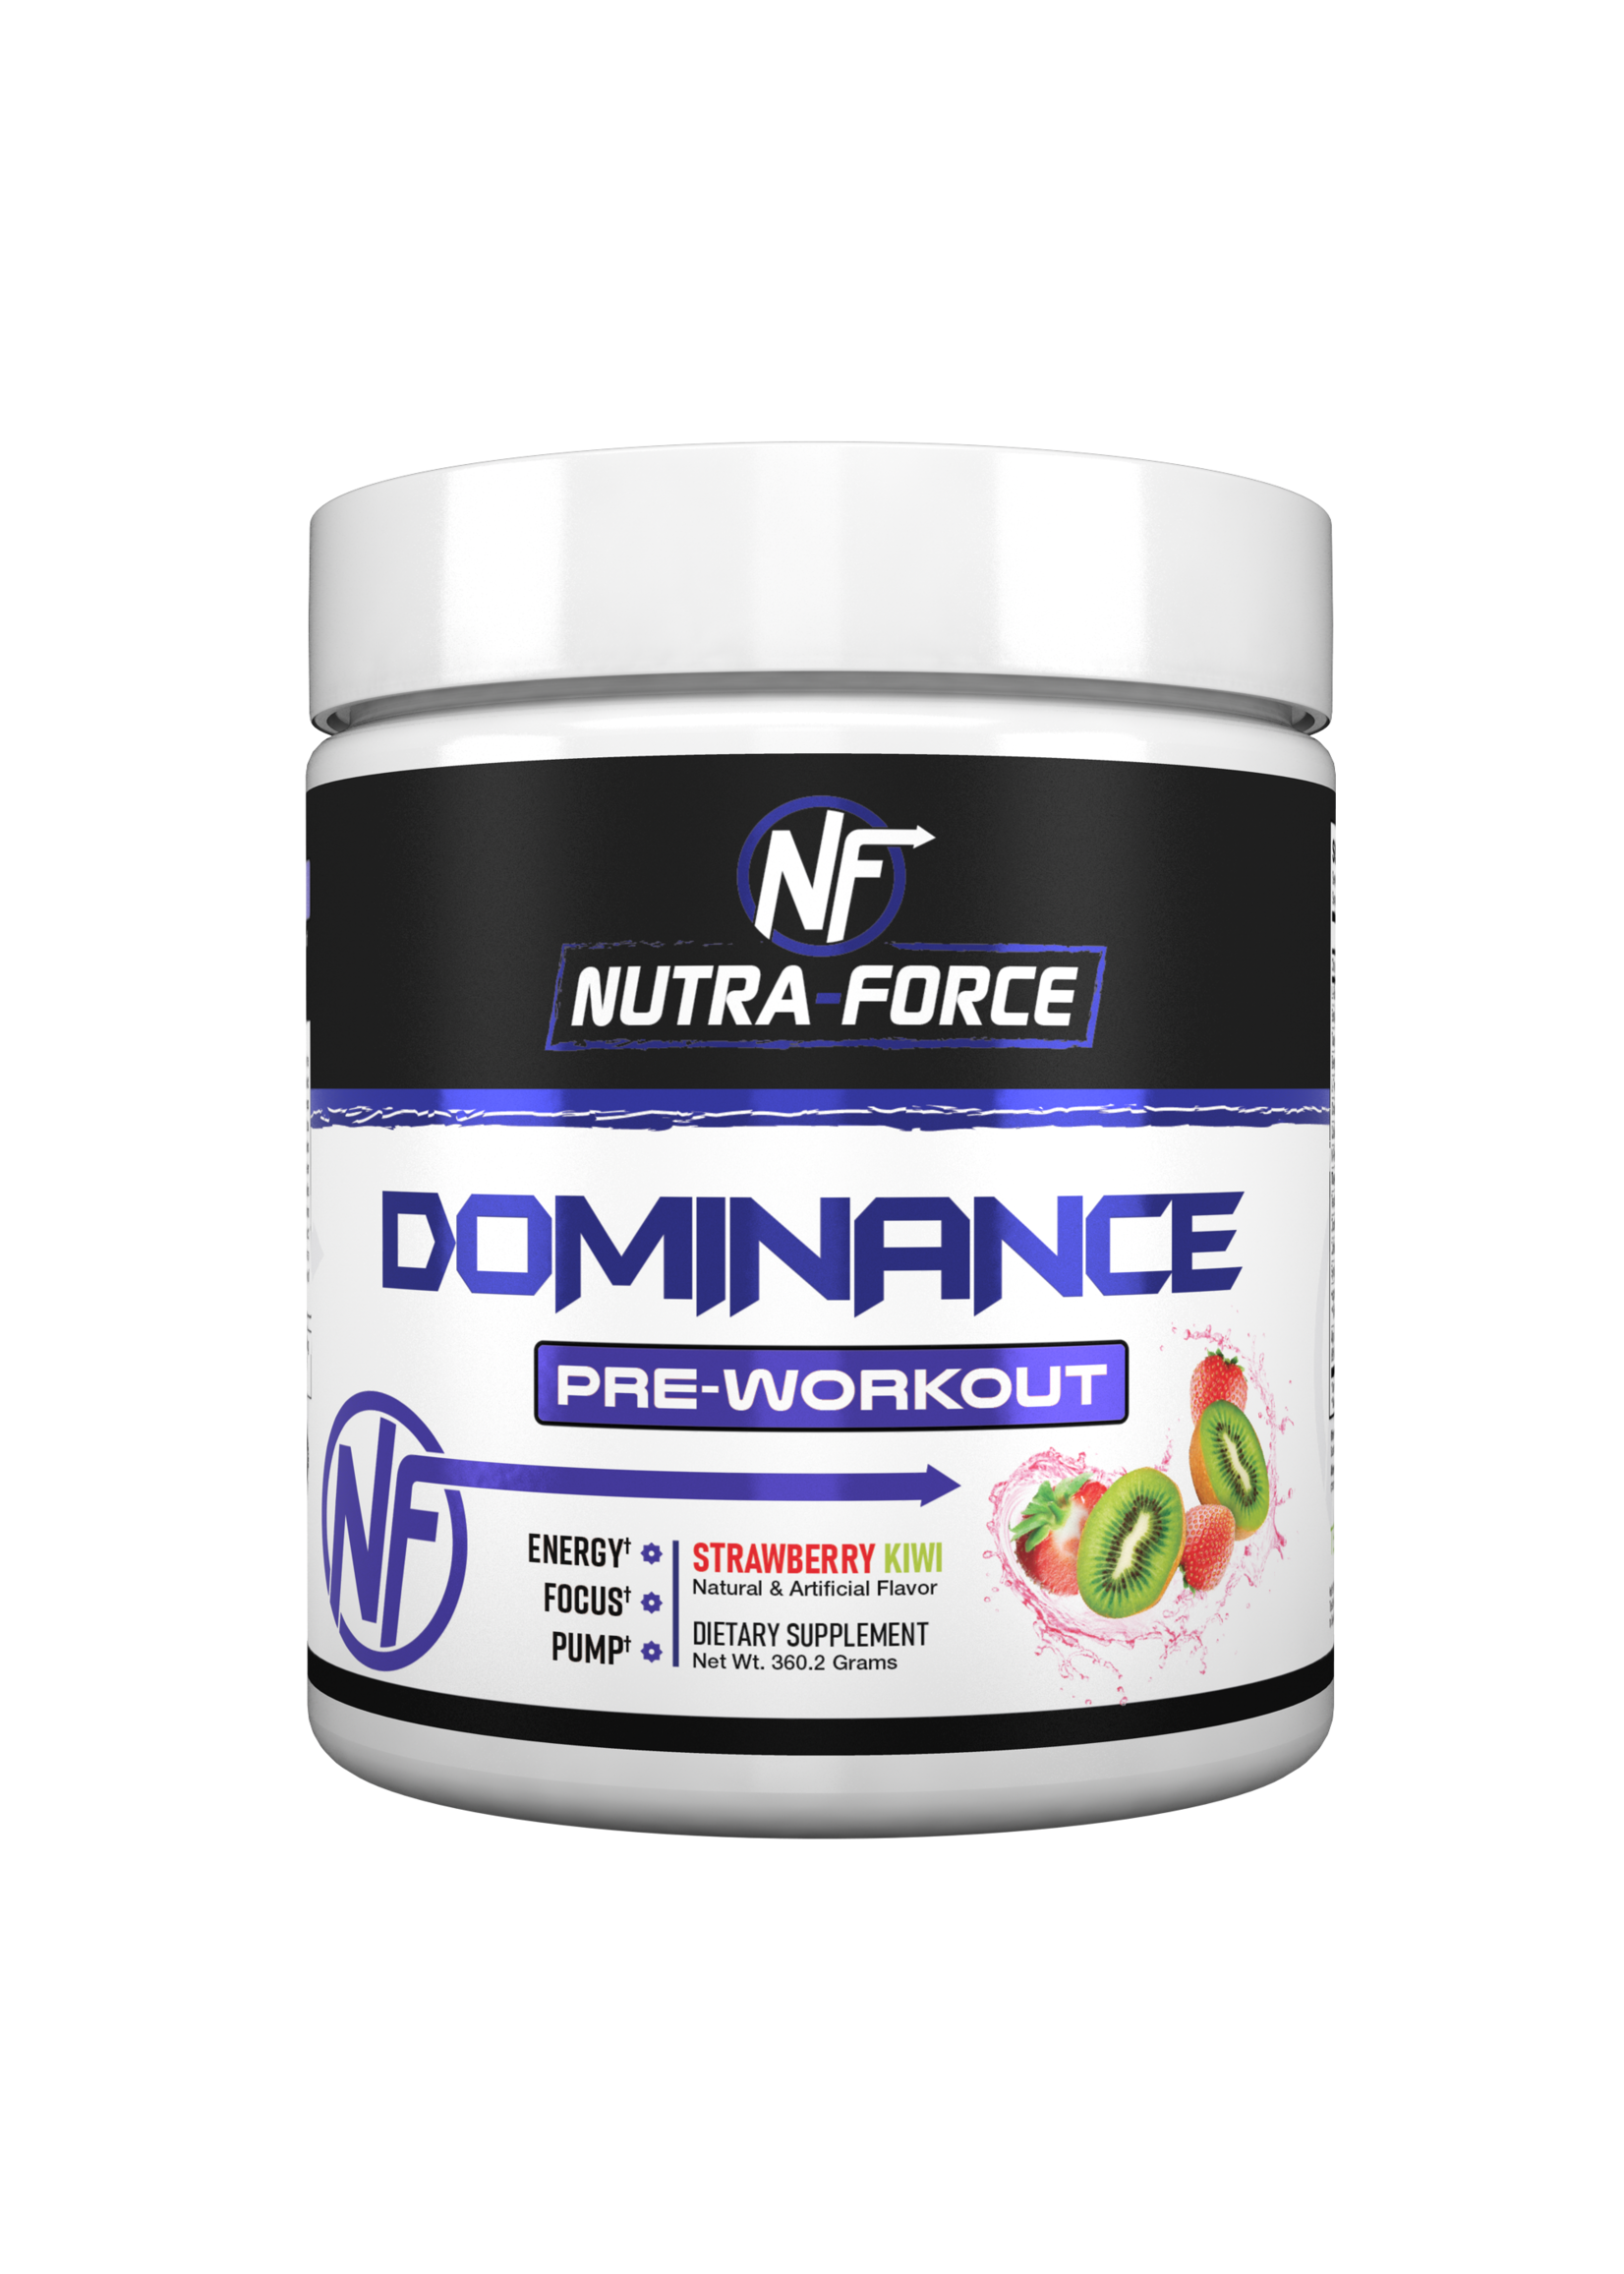 Nutra Force Dominance